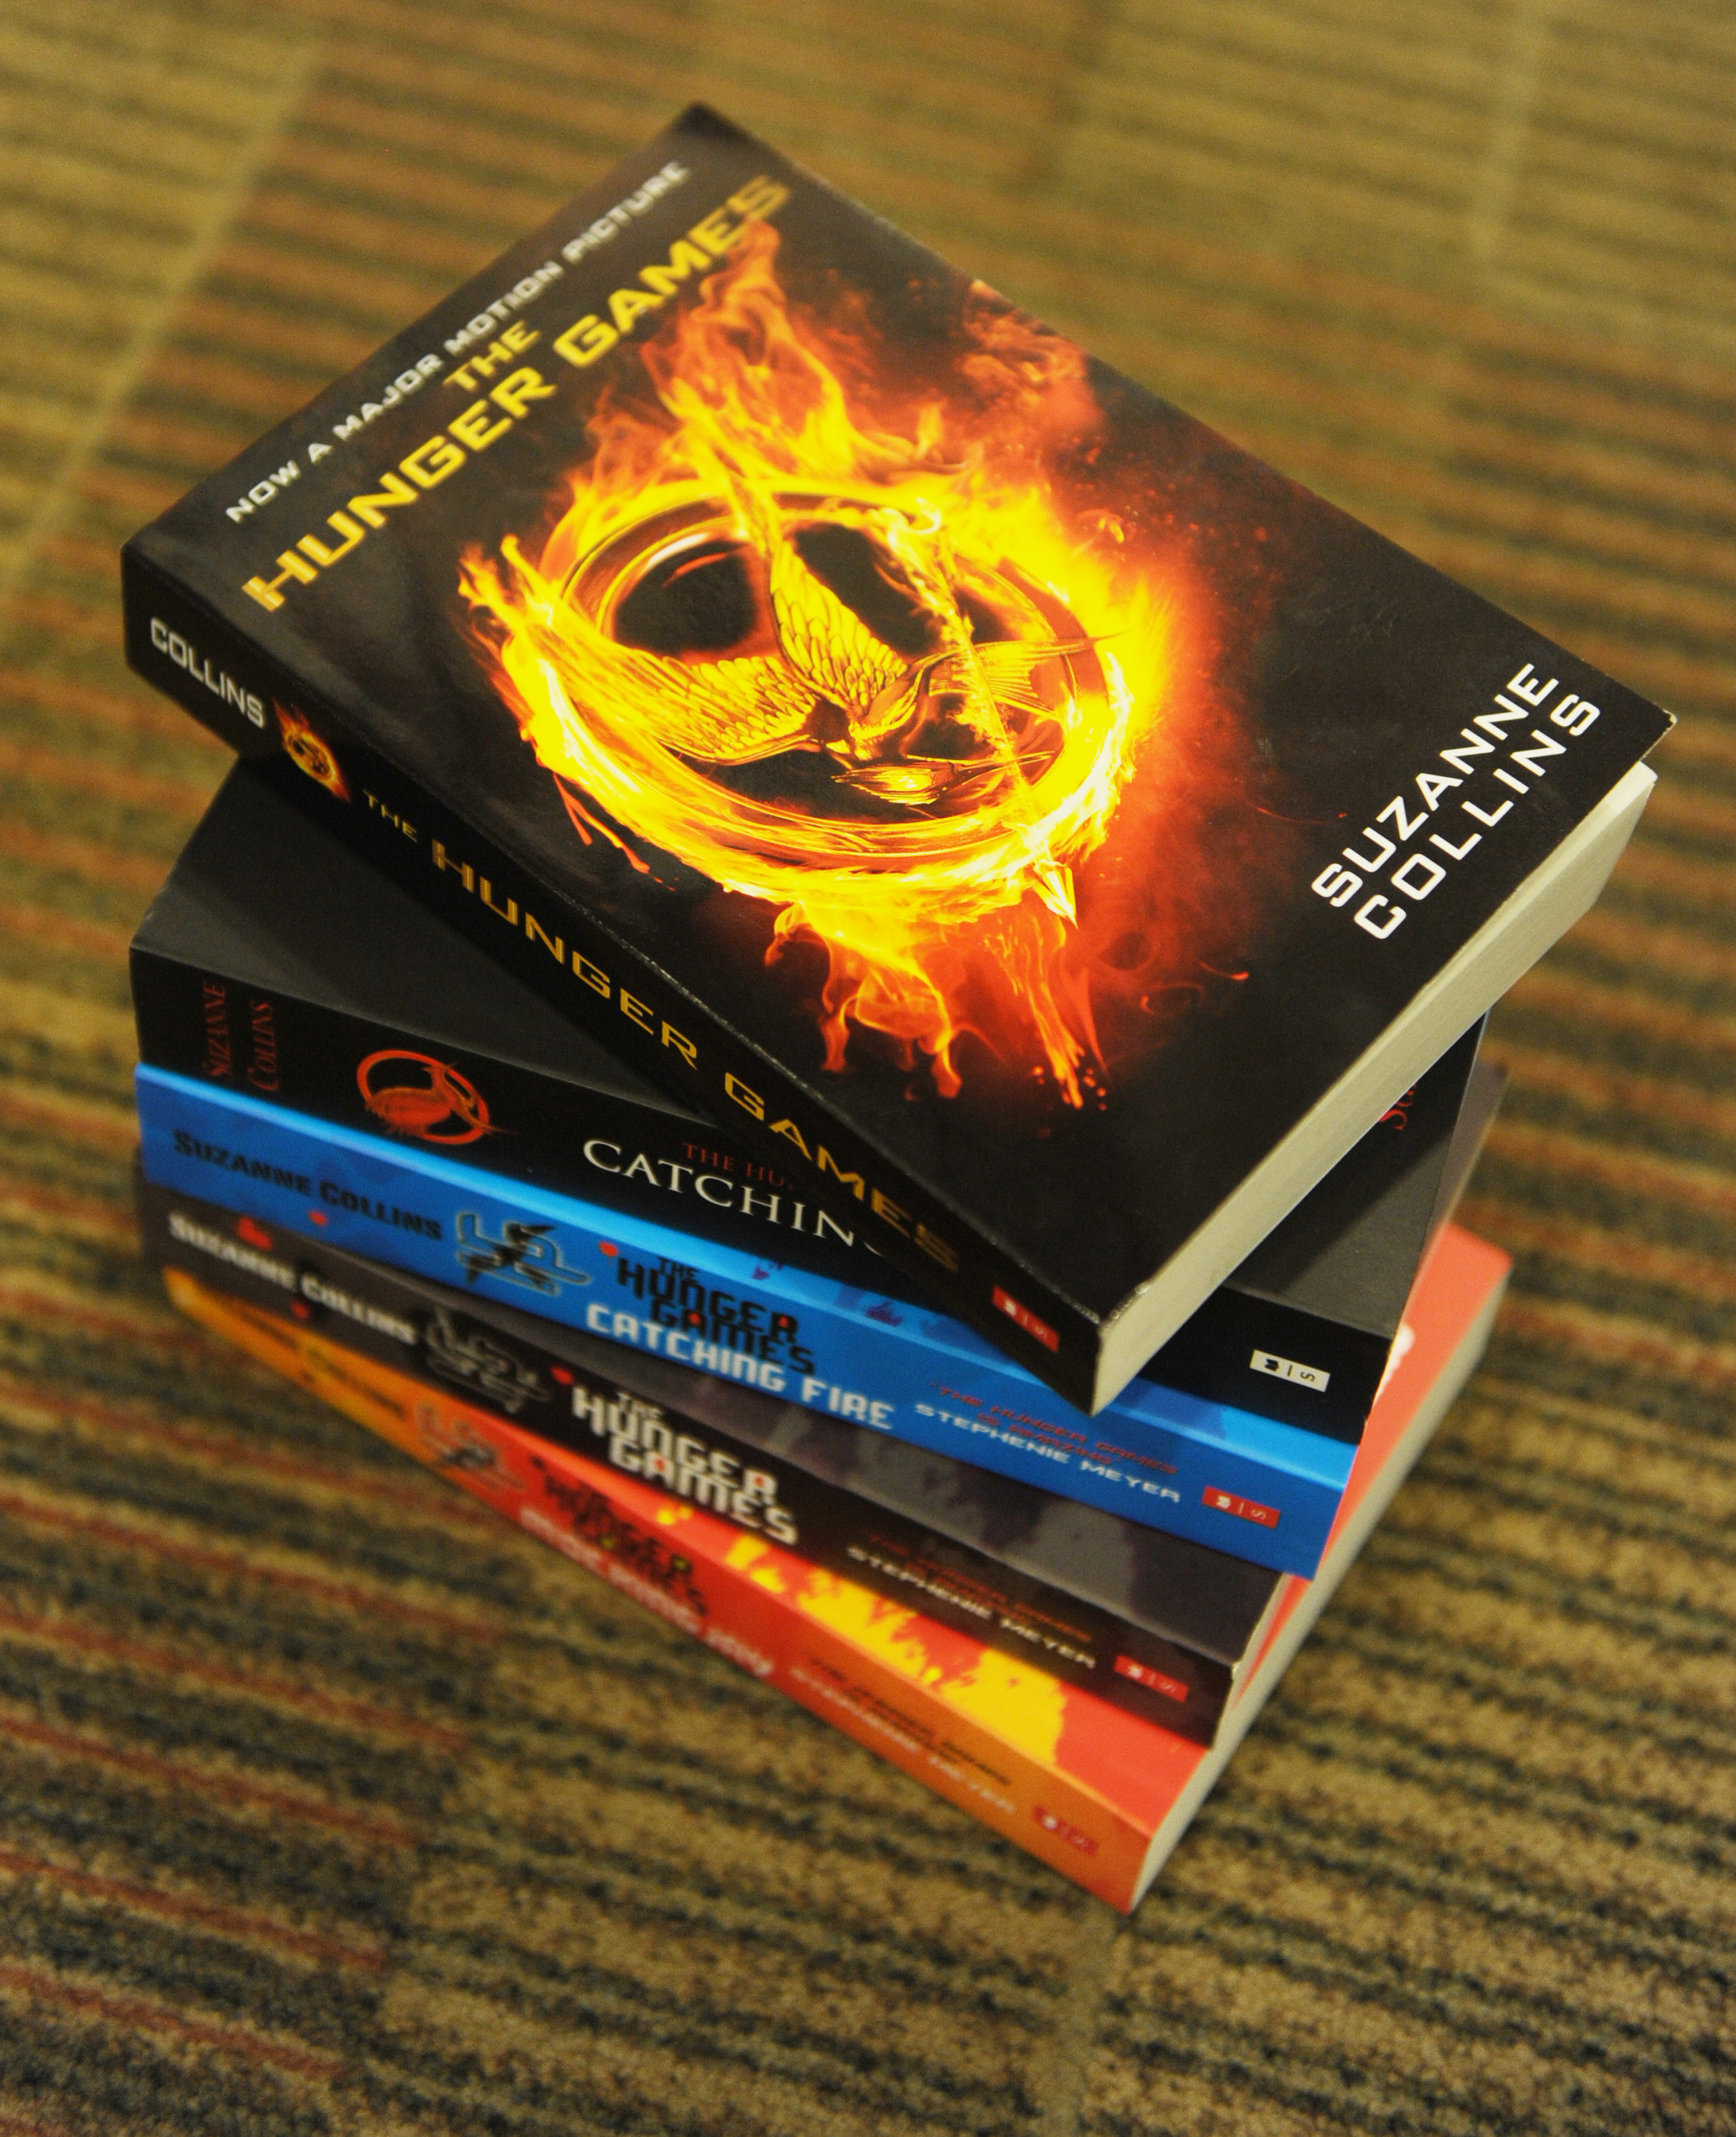 The three books in the Hunger Games trilogy stacked on top of each other